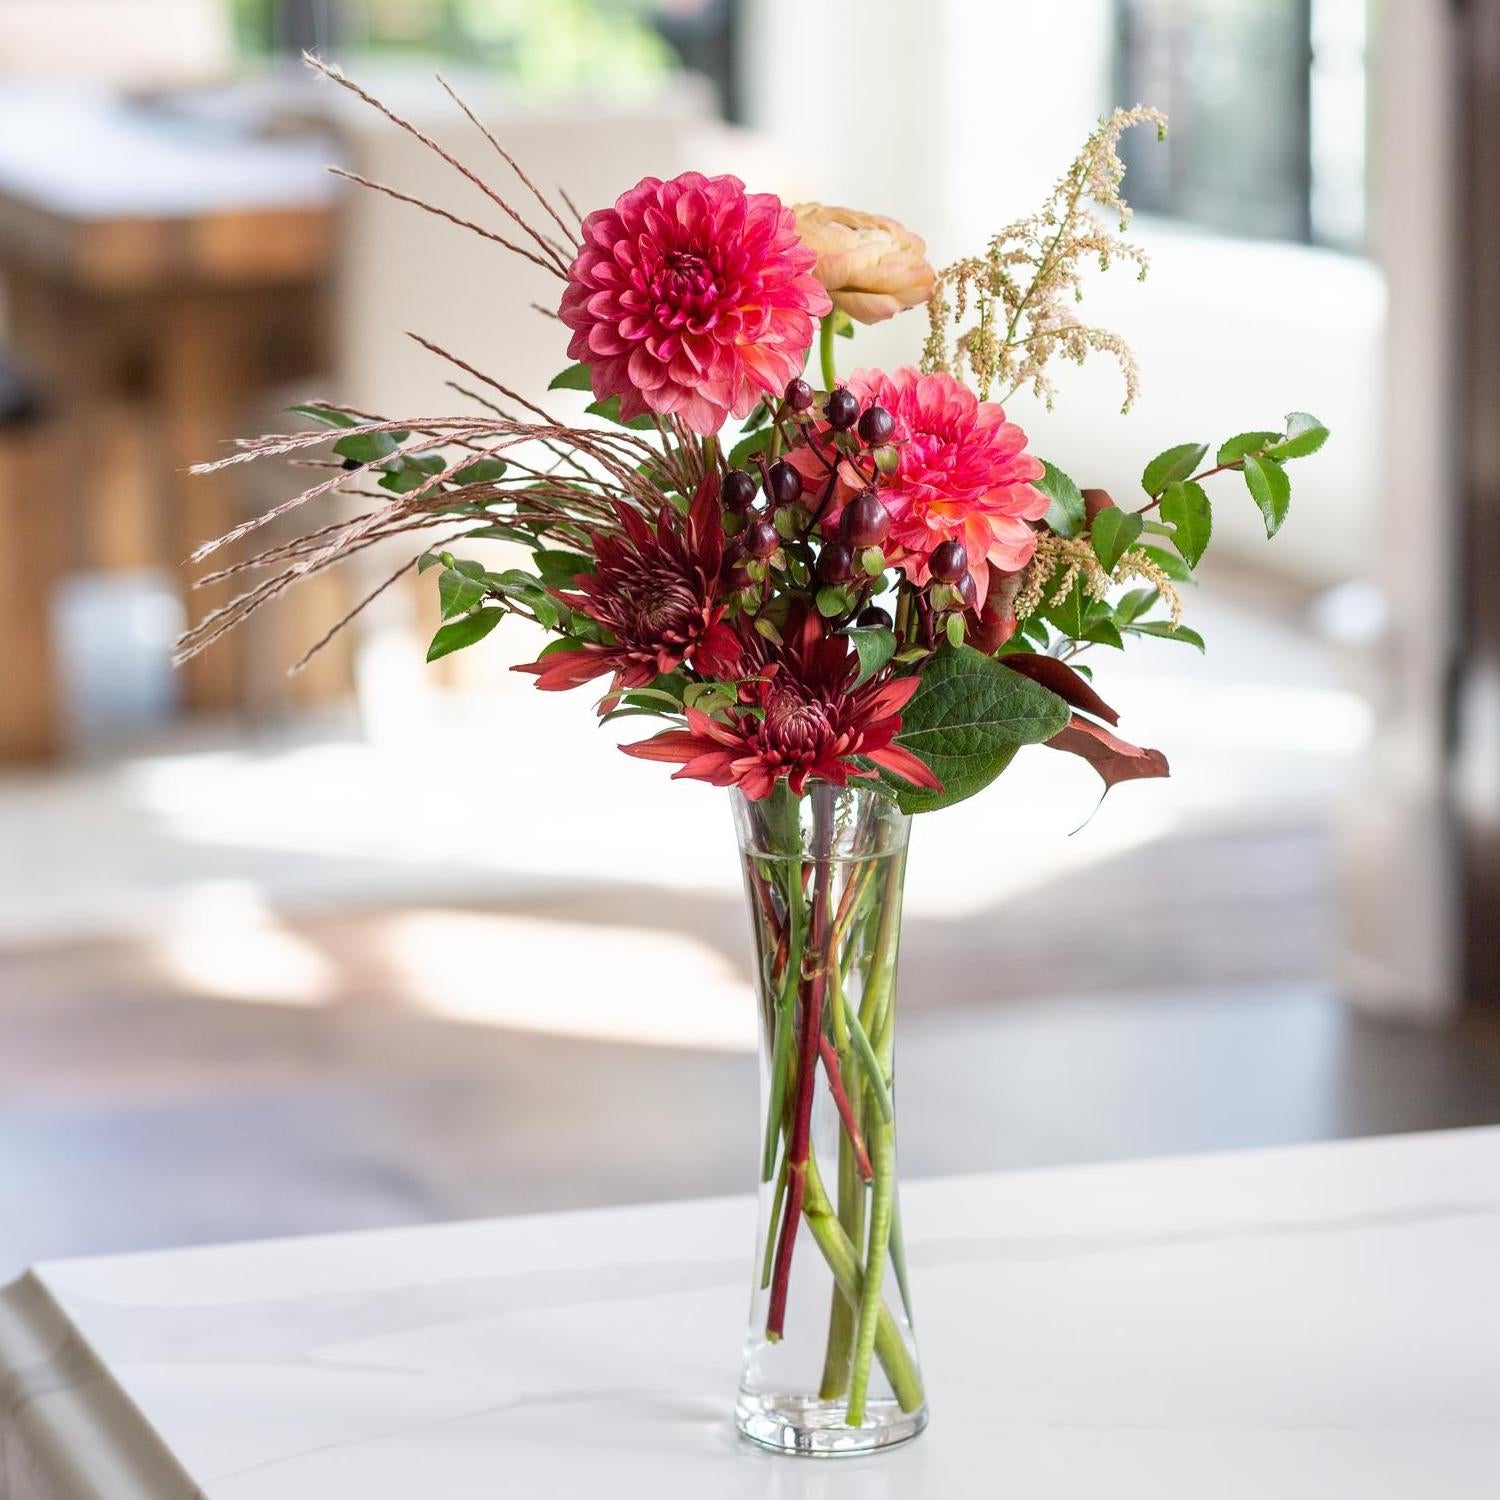 A Selena Glass Bud Vase filled with a vibrant arrangement of red and pink dahlias, complemented by dark red berries, green leaves, and decorative grasses, sitting on a white surface with a blurred indoor background.